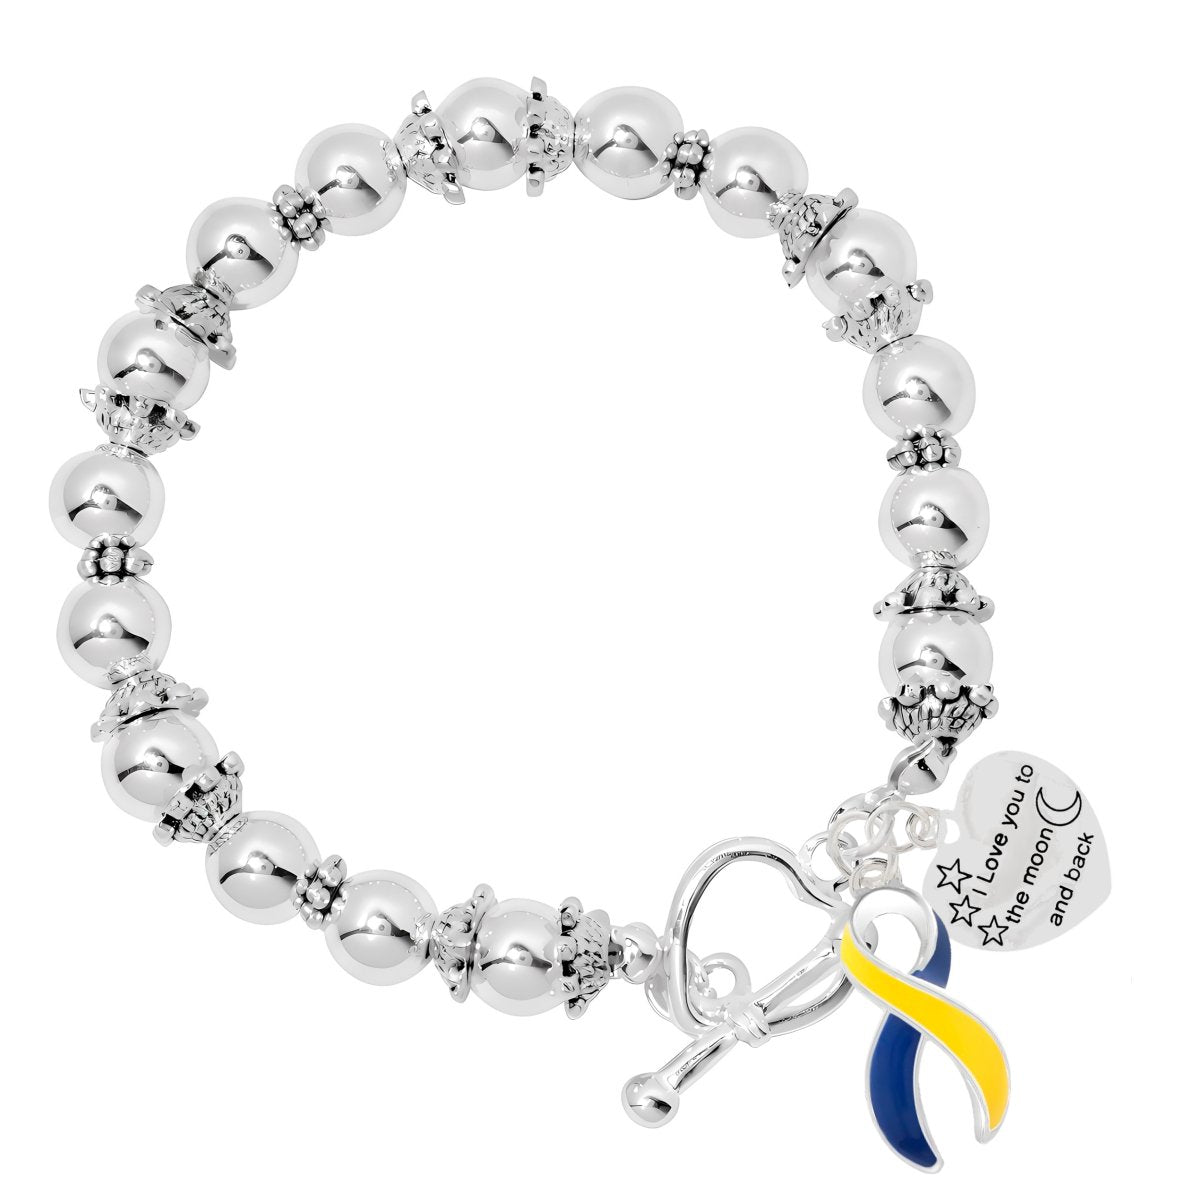 Blue & Yellow Ribbon Love You To The Moon Silver Beaded Bracelets - Fundraising For A Cause